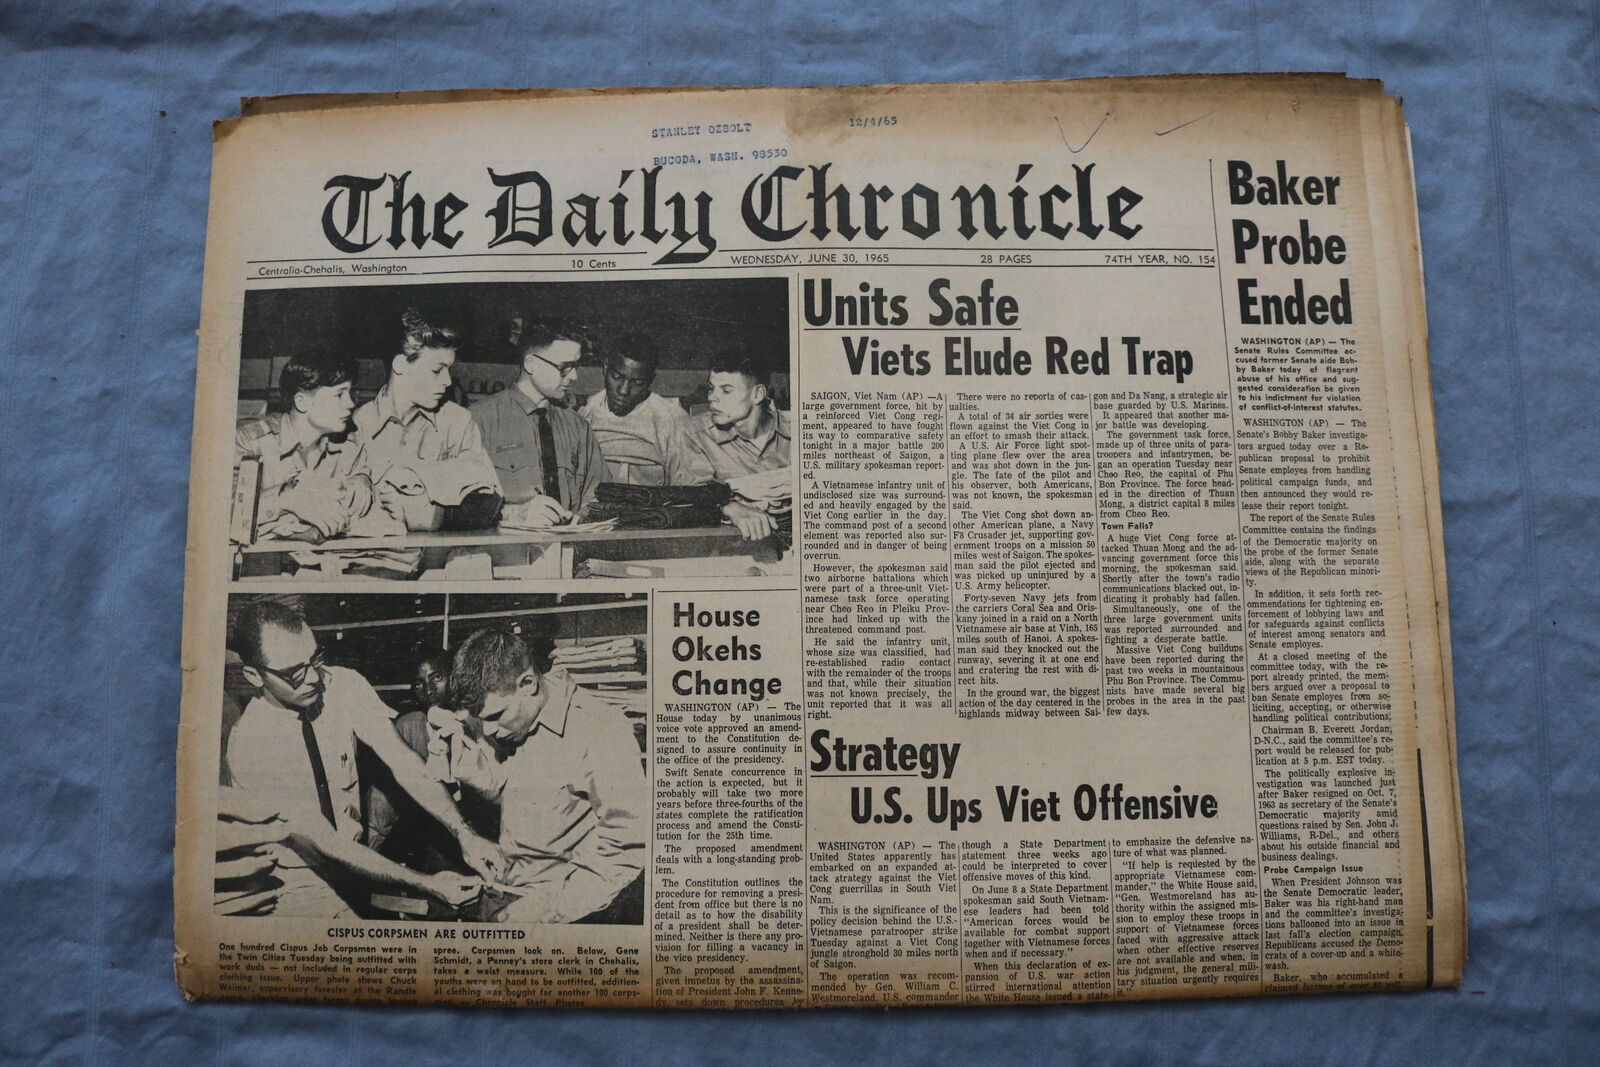 1965 JUNE 30 THE DAILY CHRONICLE NEWSPAPER - VIETS ELUDE RED TRAP - NP 8534